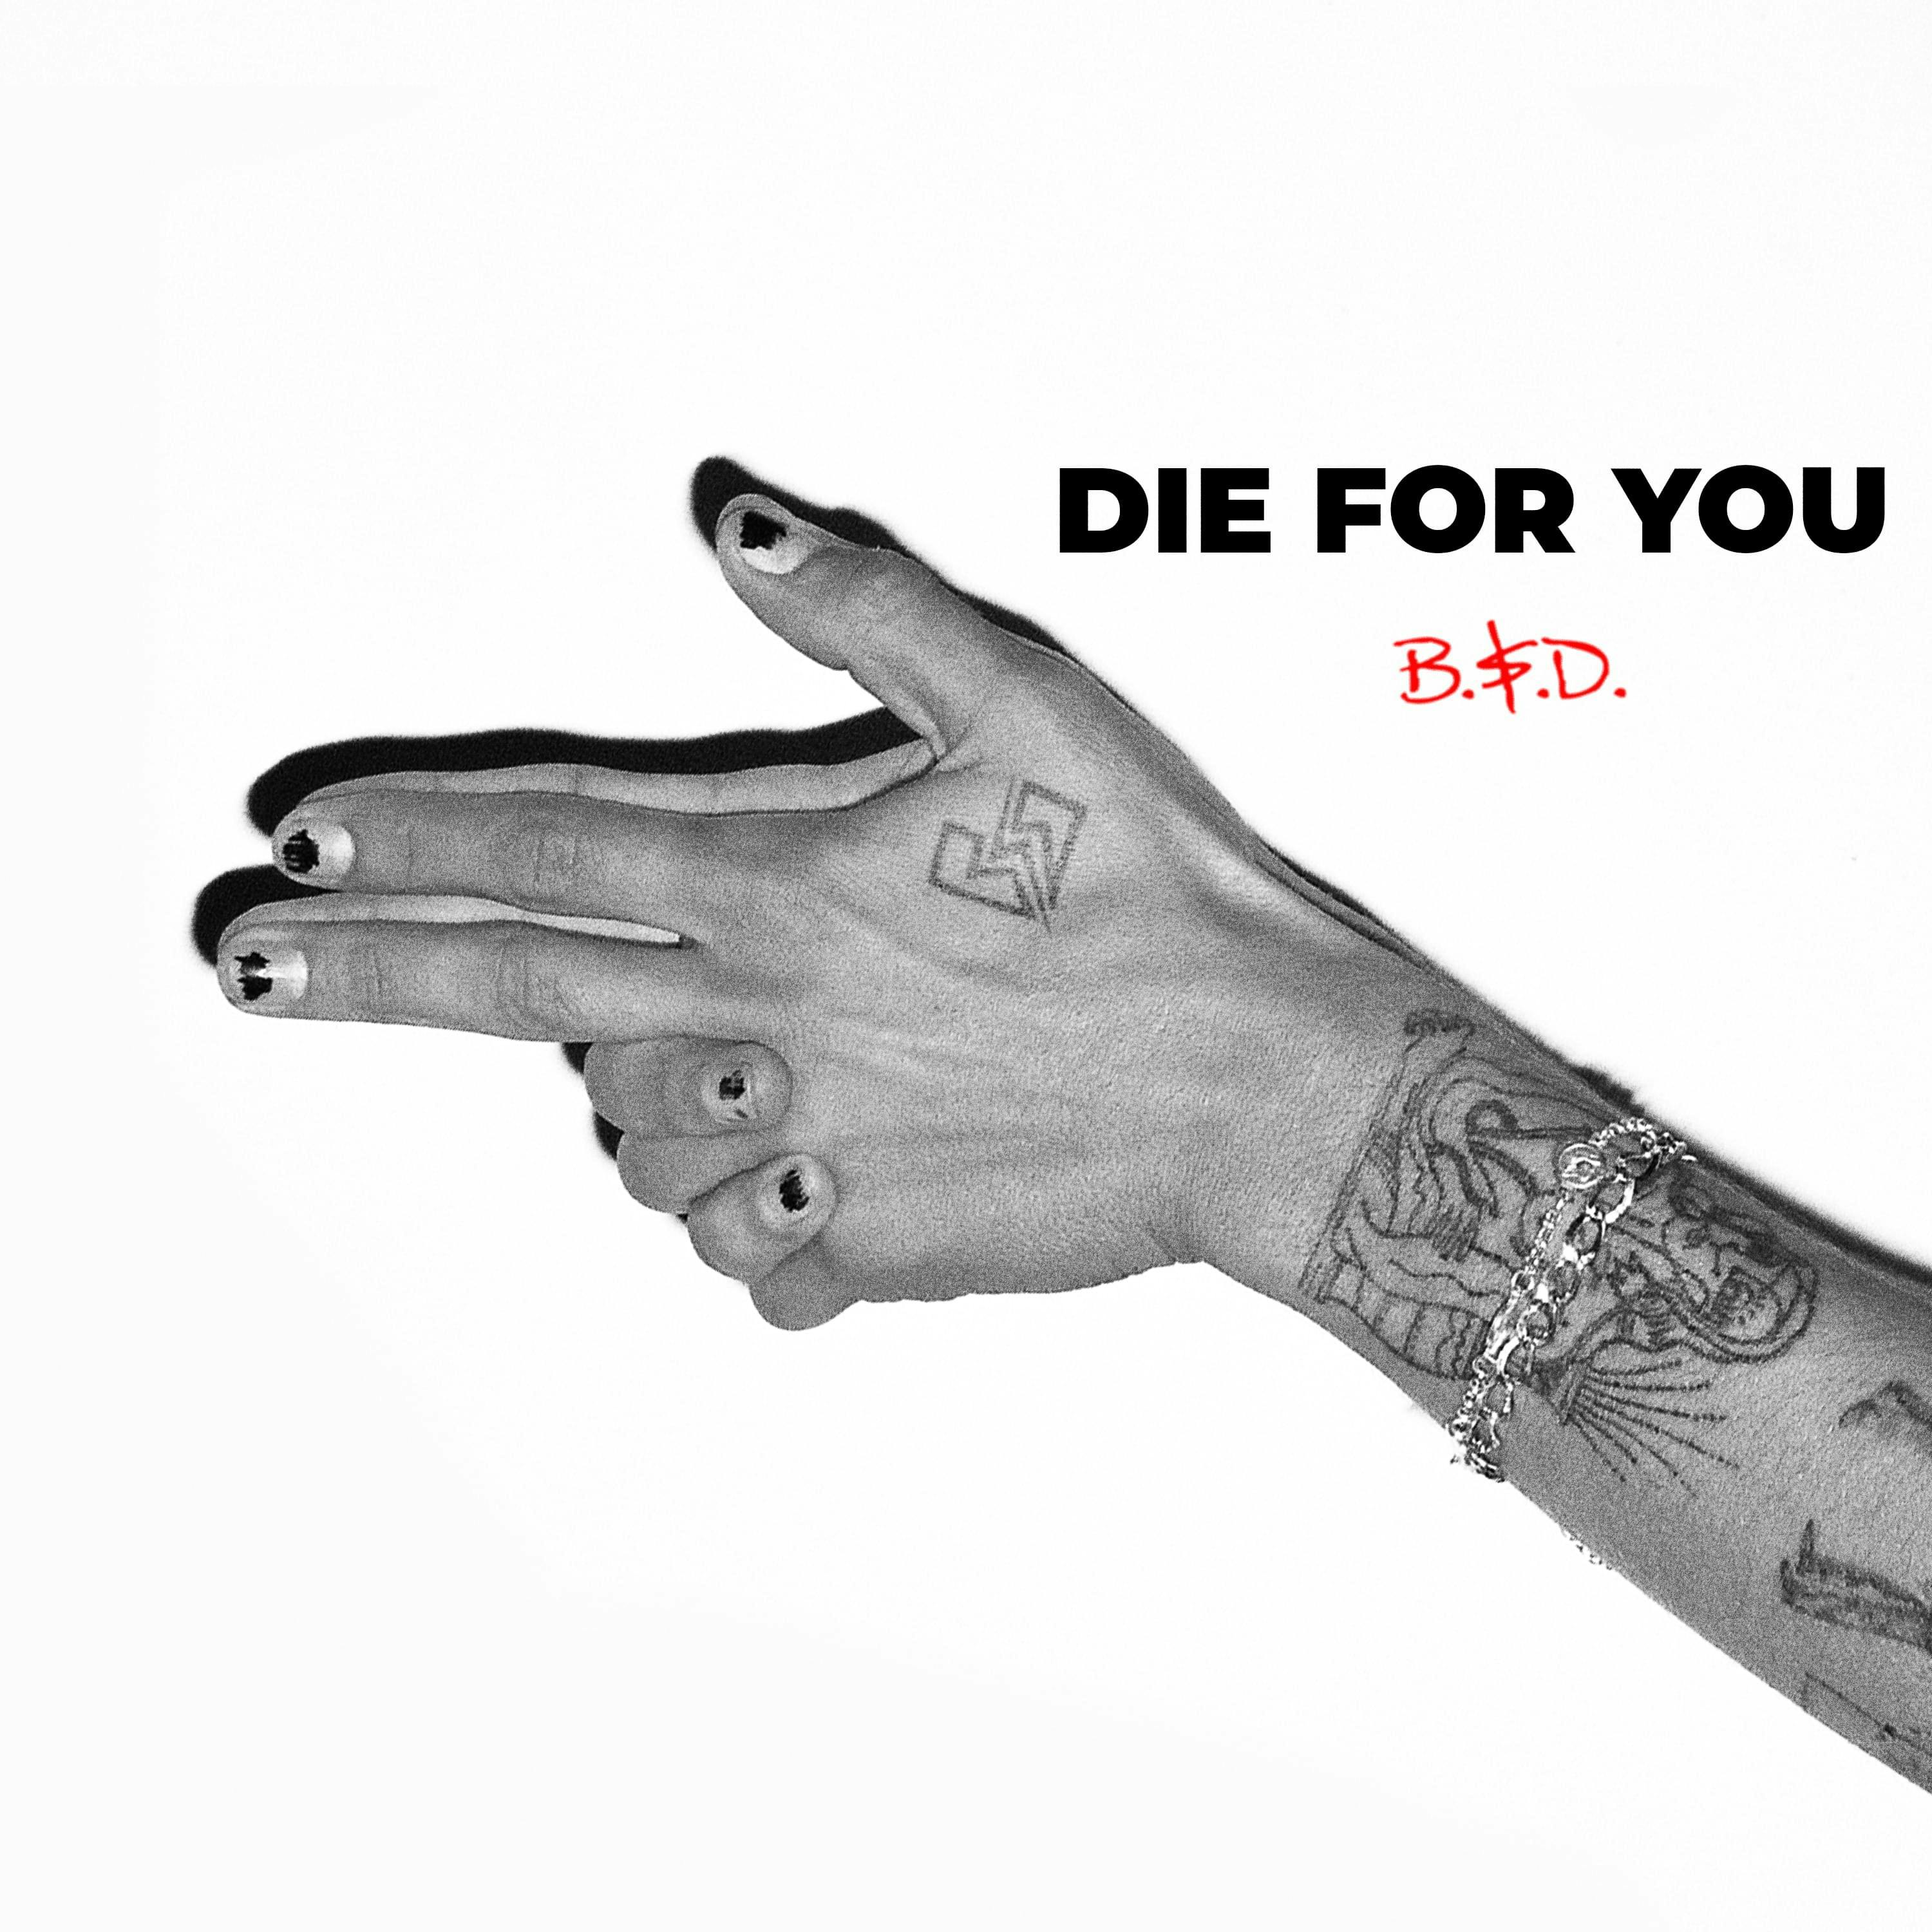 Cover art for Beauty School Dropout's song: Die For You